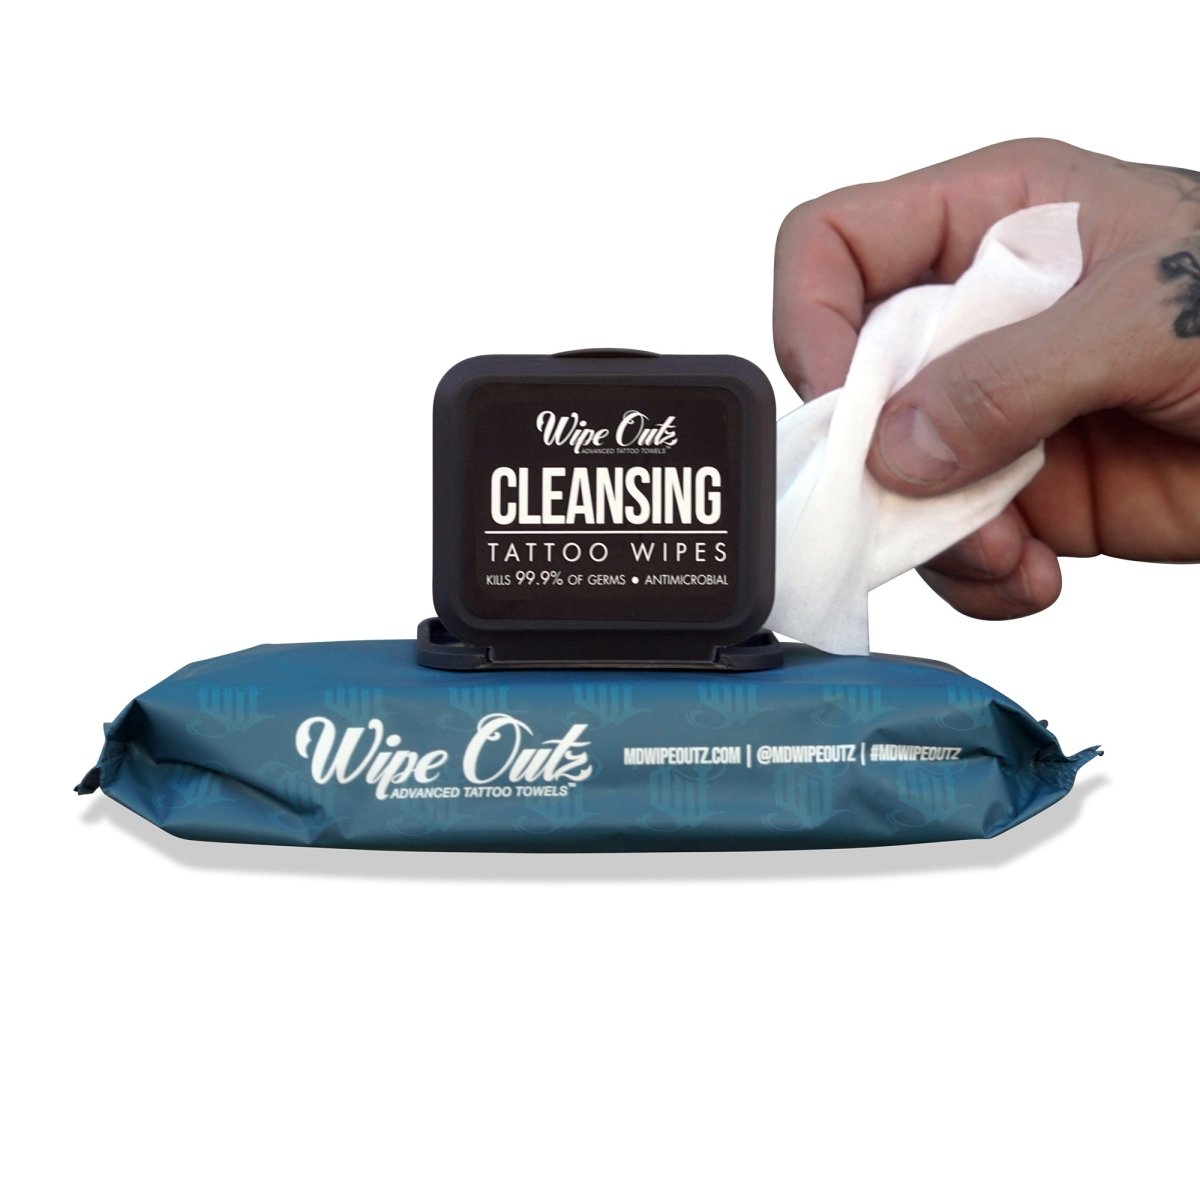 Cleansing Tattoo Wipes Wholesale - MD Wipe Outz